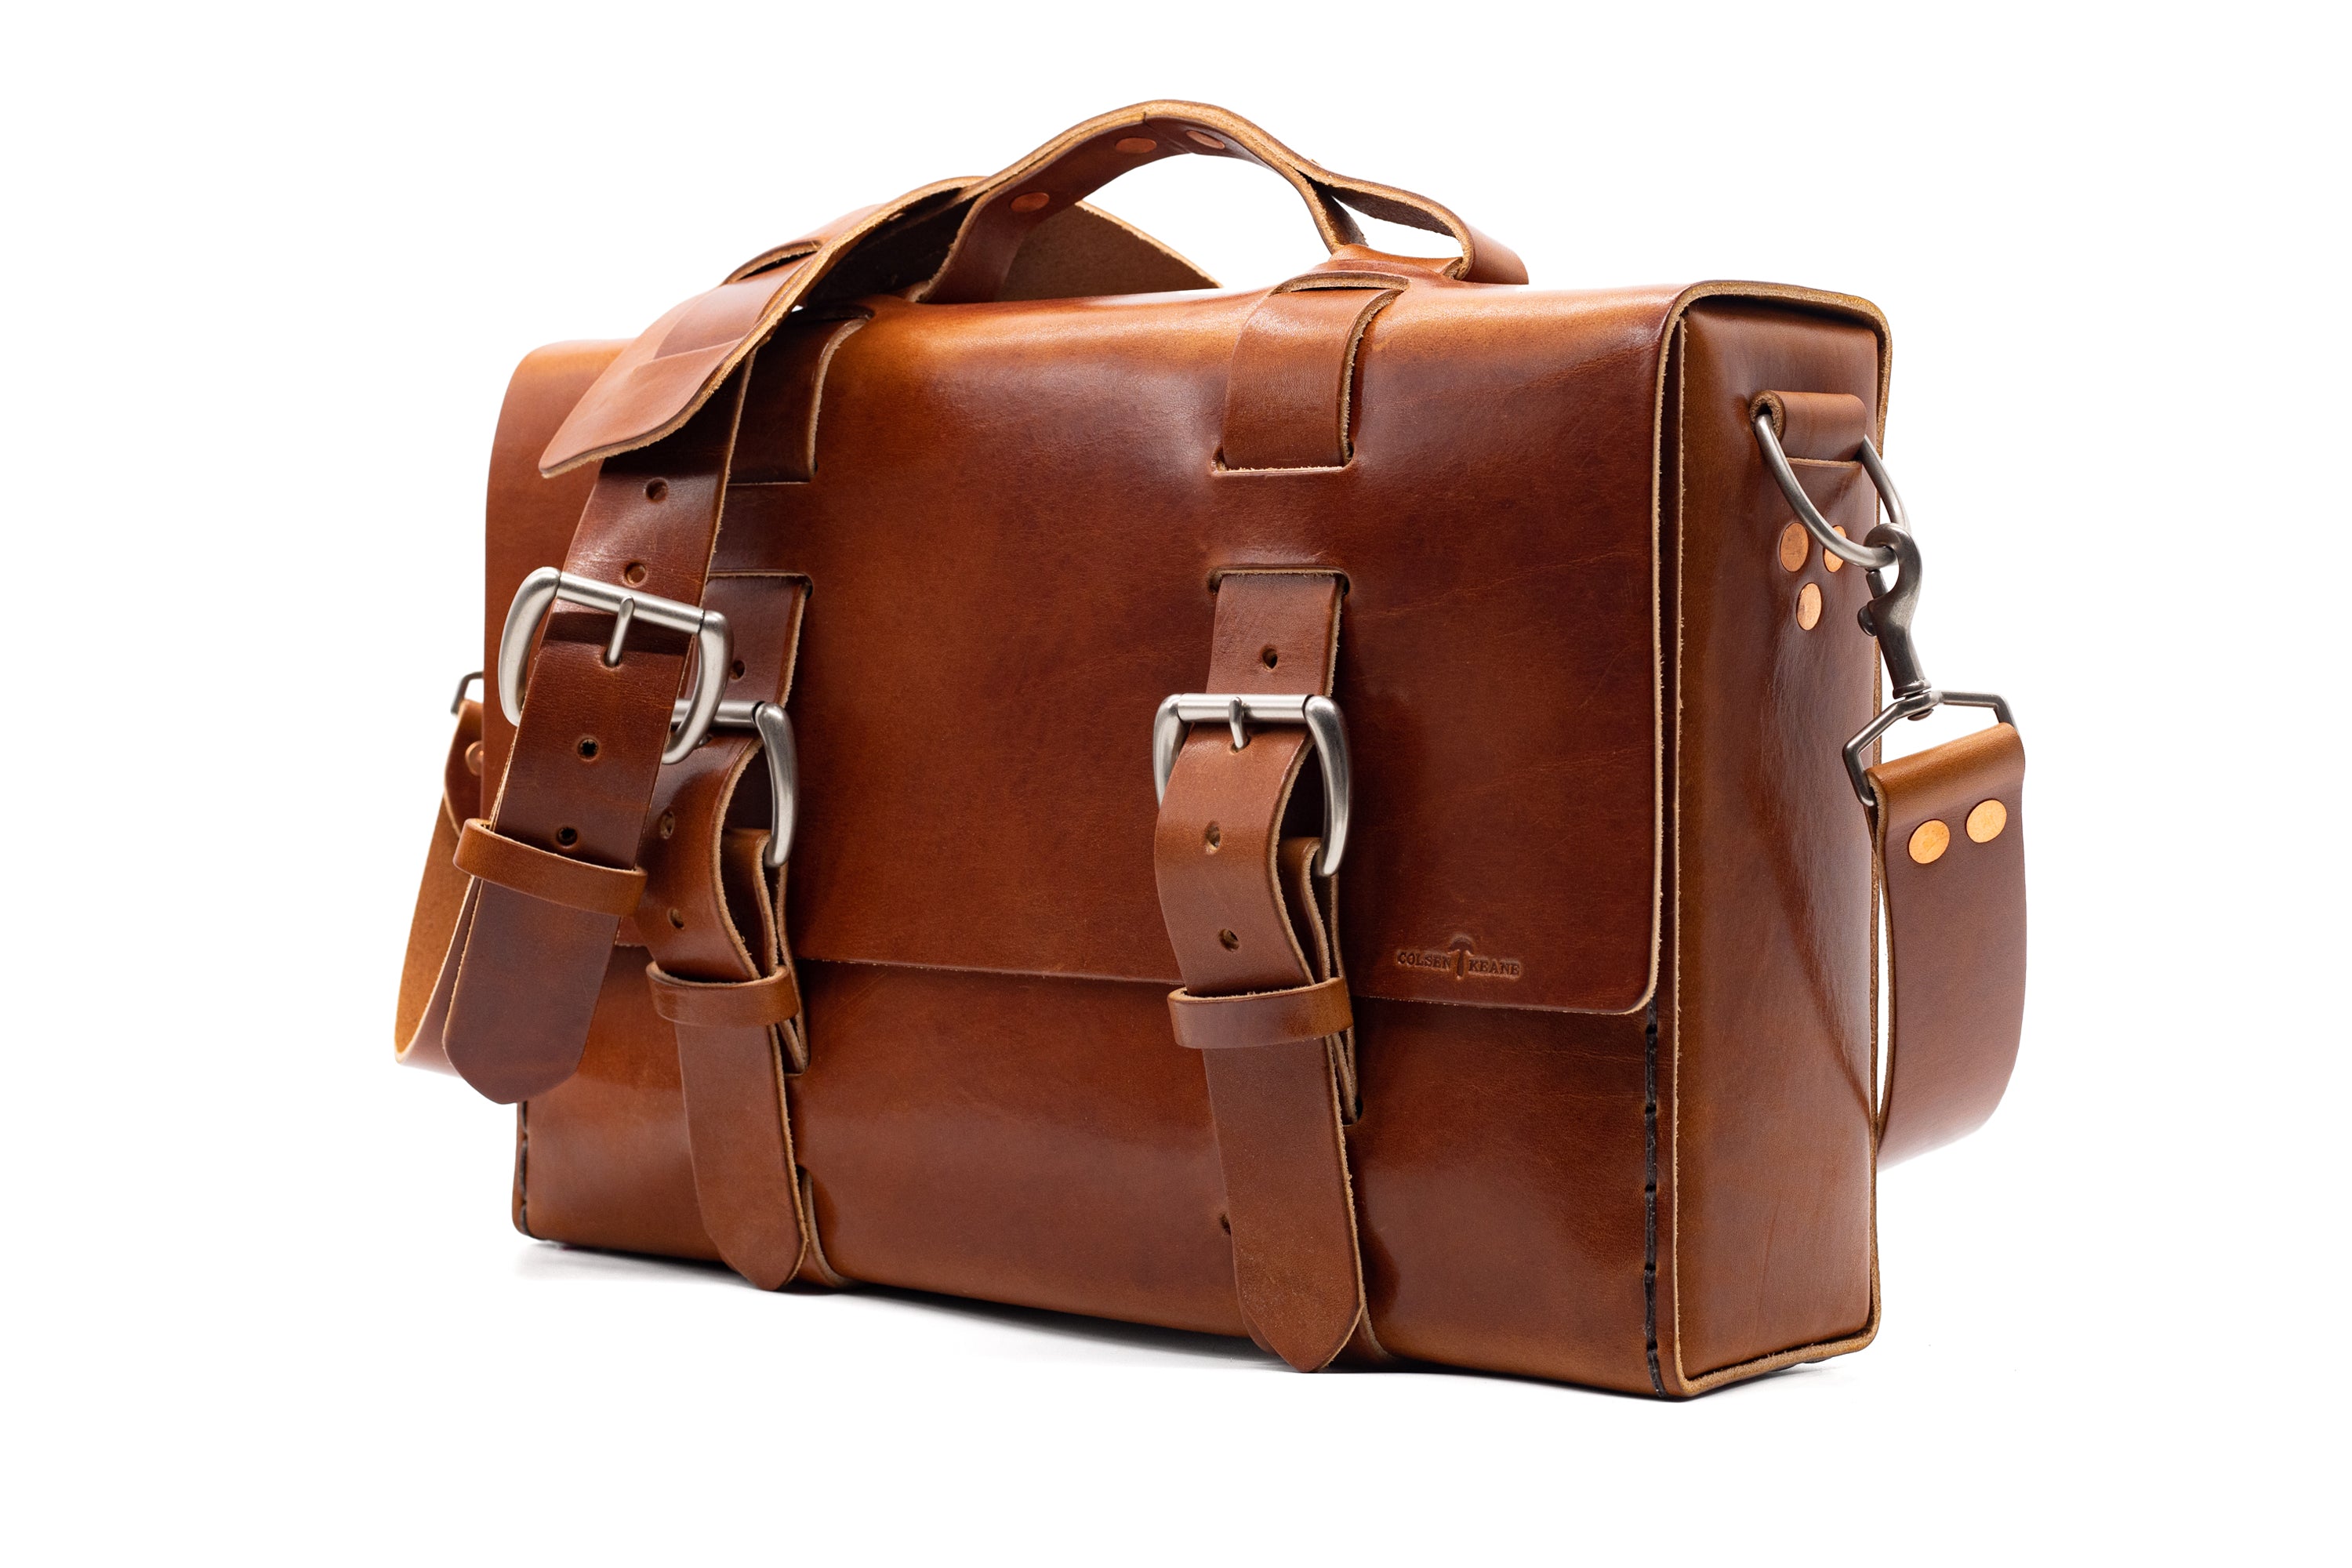 LIMITED EDITION NO. 4313 MINIMALIST STANDARD LEATHER SATCHEL IN AMBER BROWN - ONLY 1 MADE